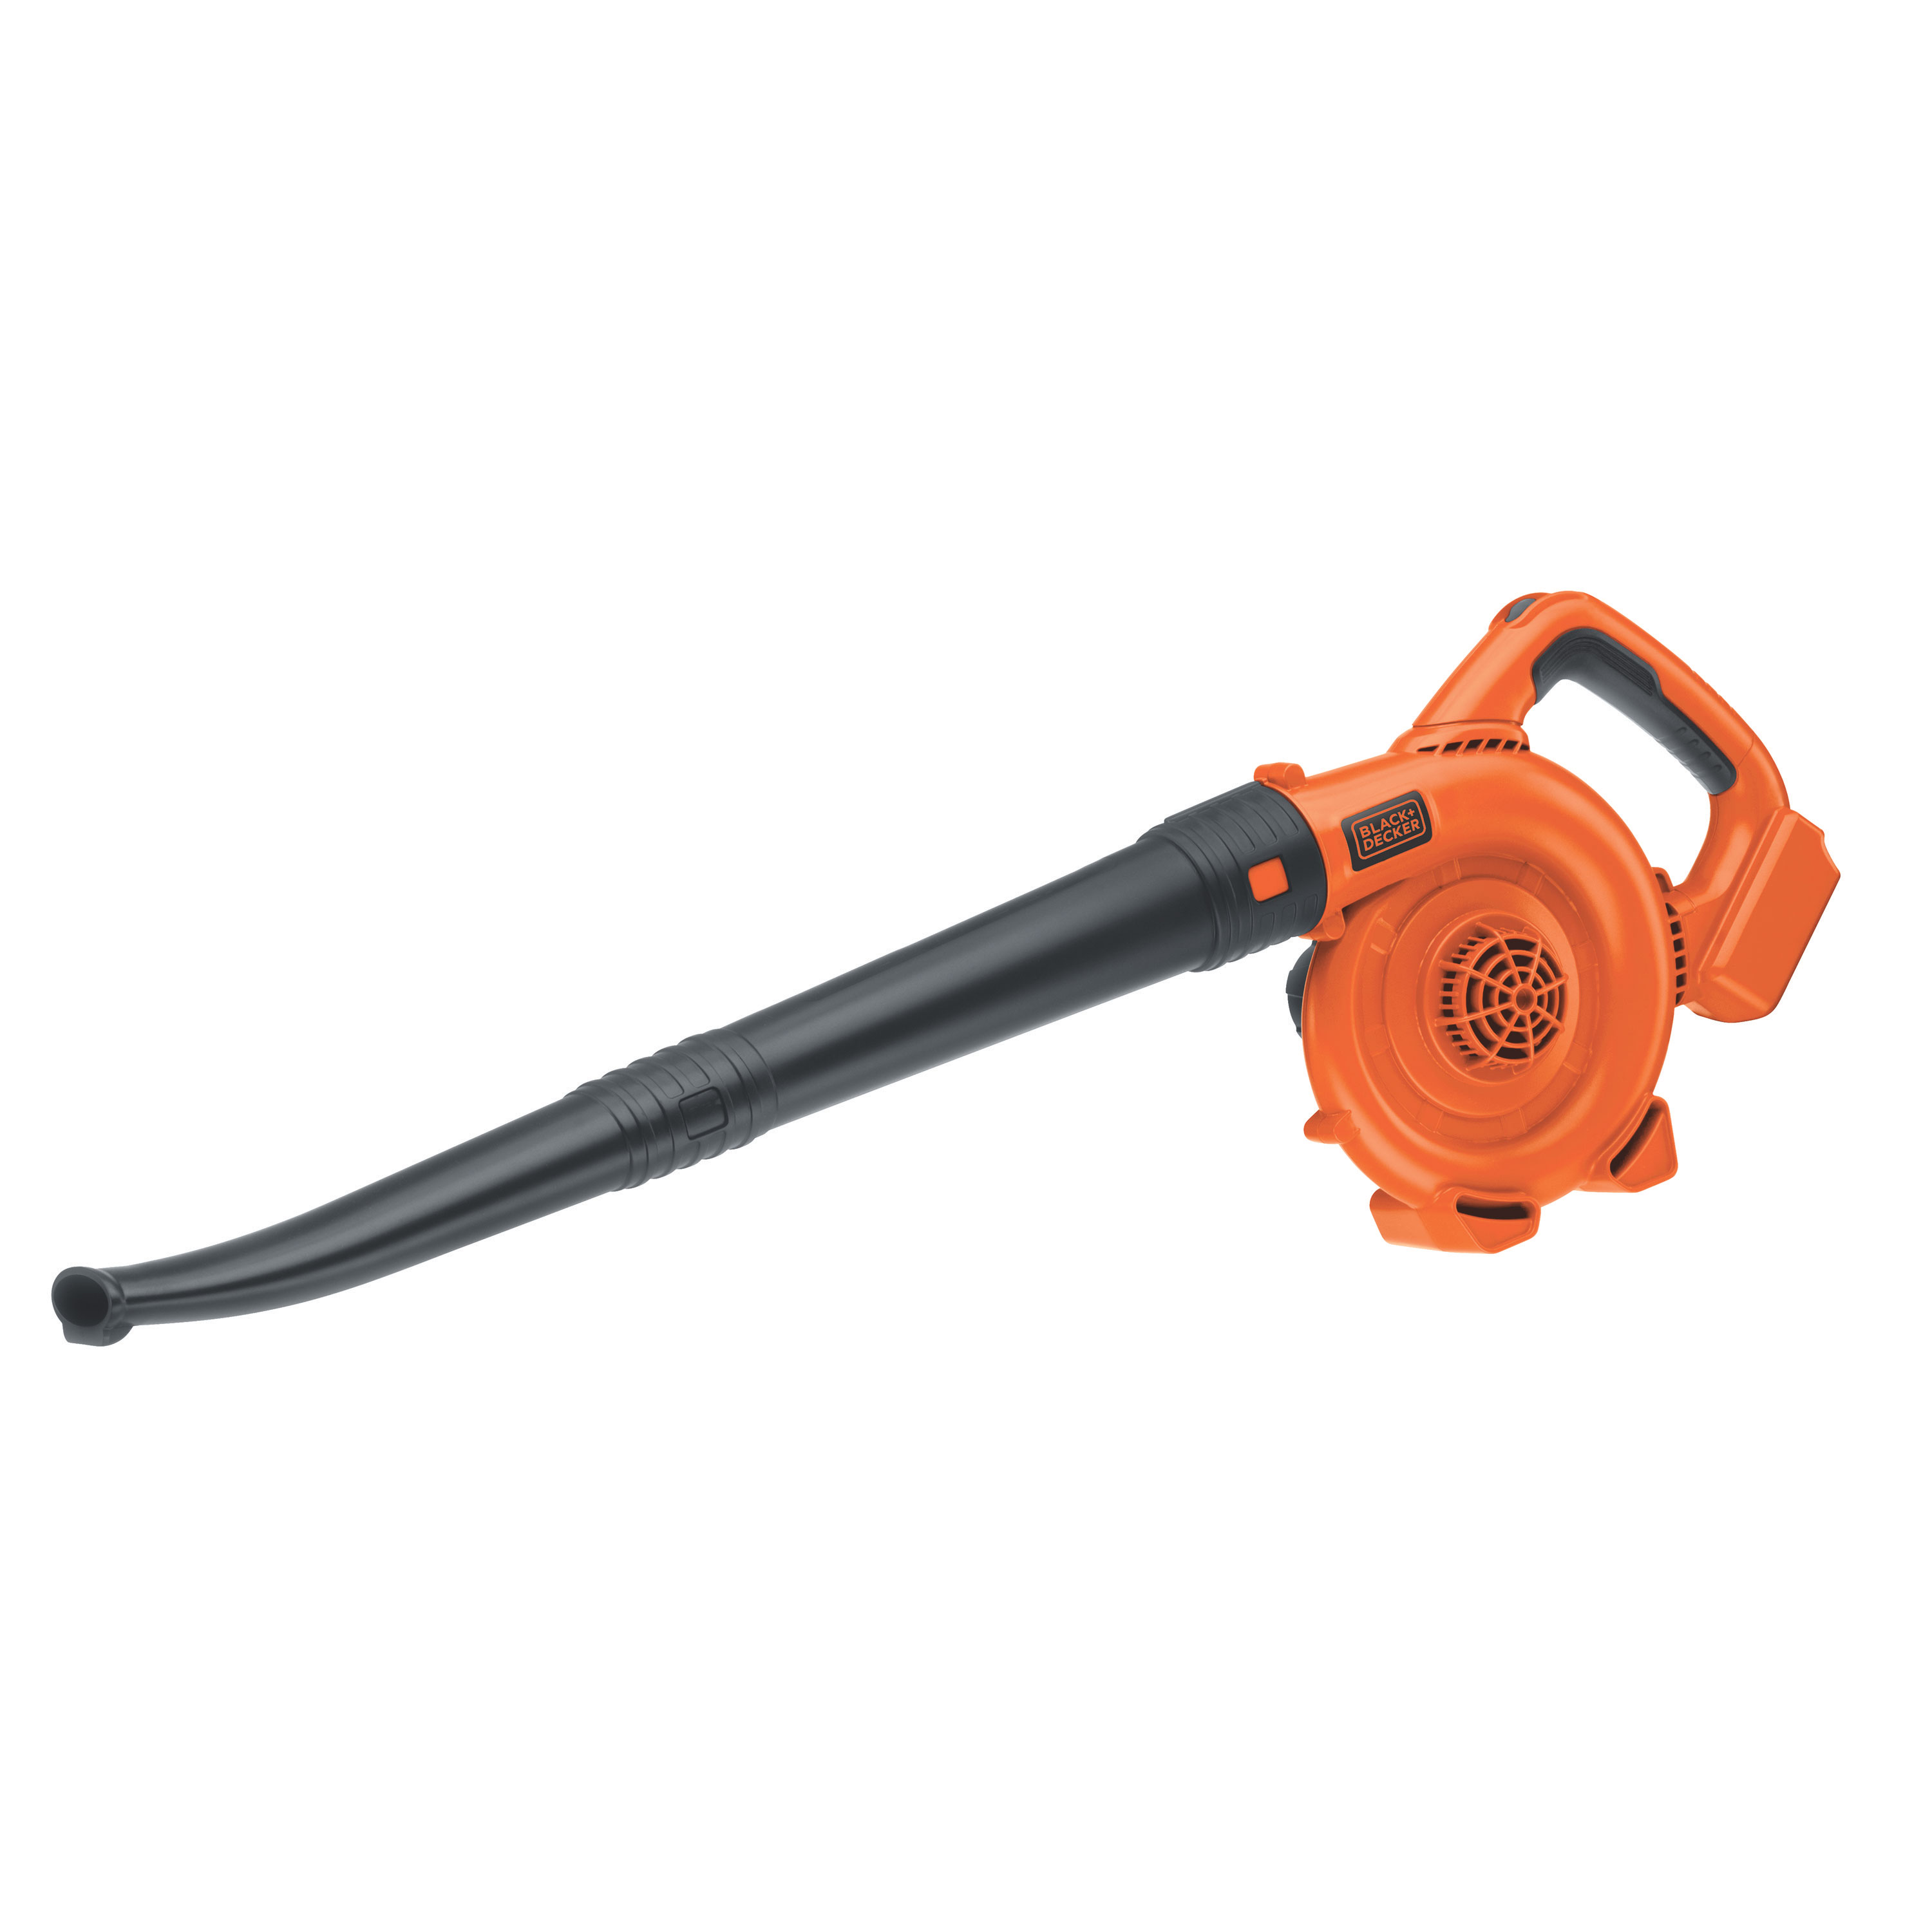 Official Black & Decker LSW20 TYPE 1 electric leaf blower parts